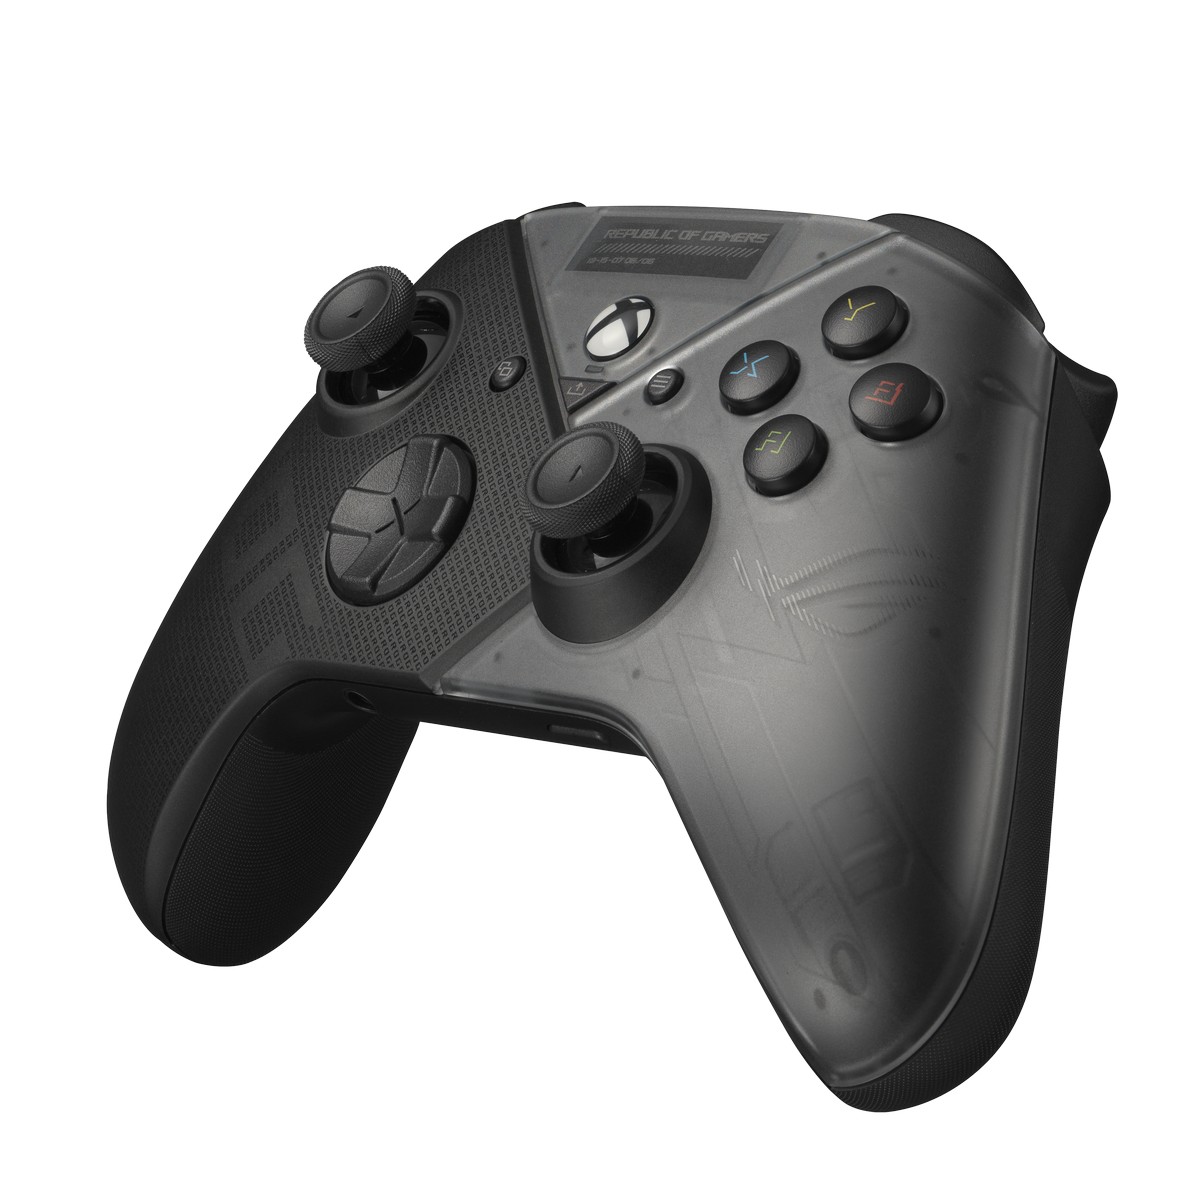 Asus - Asus ROG Raikiri officially licensed XBOX controller For PC and XBOX